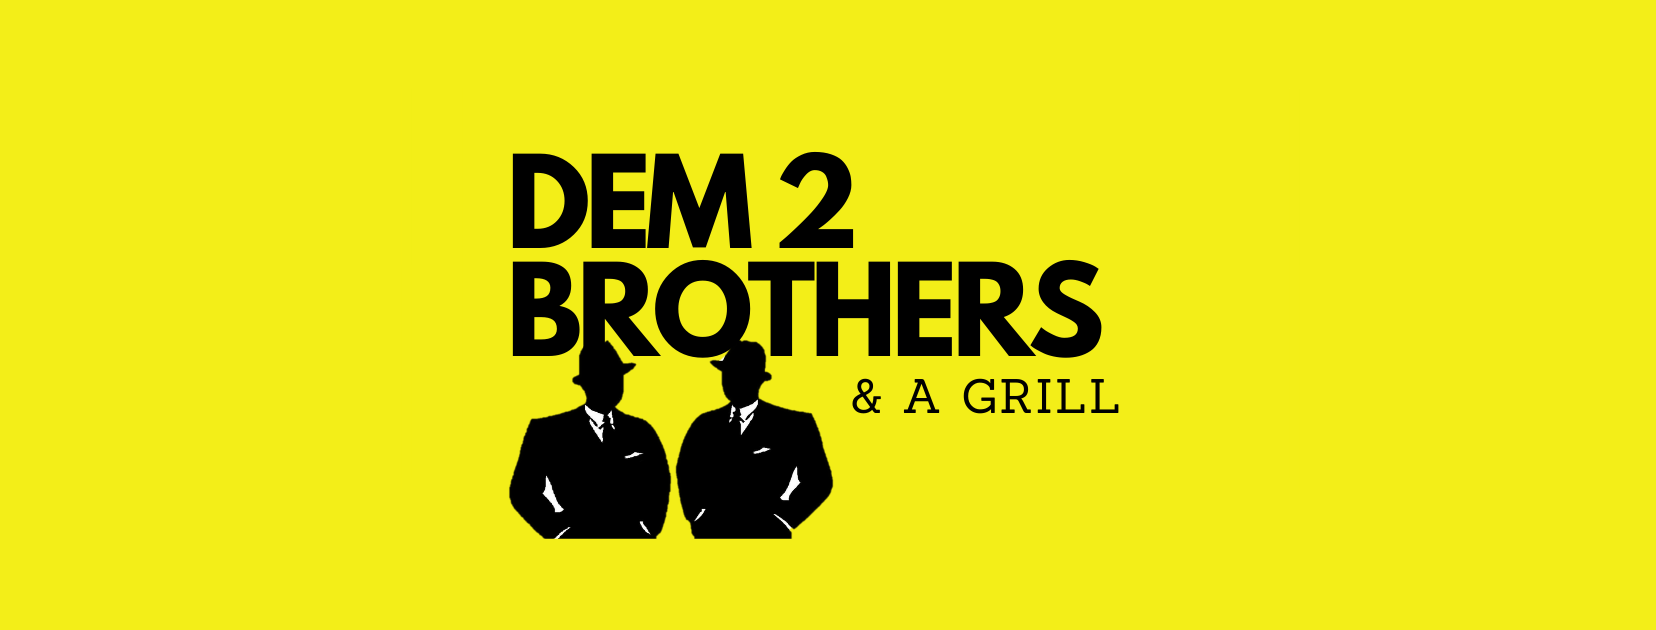 Dem 2 Brothers and a Grill